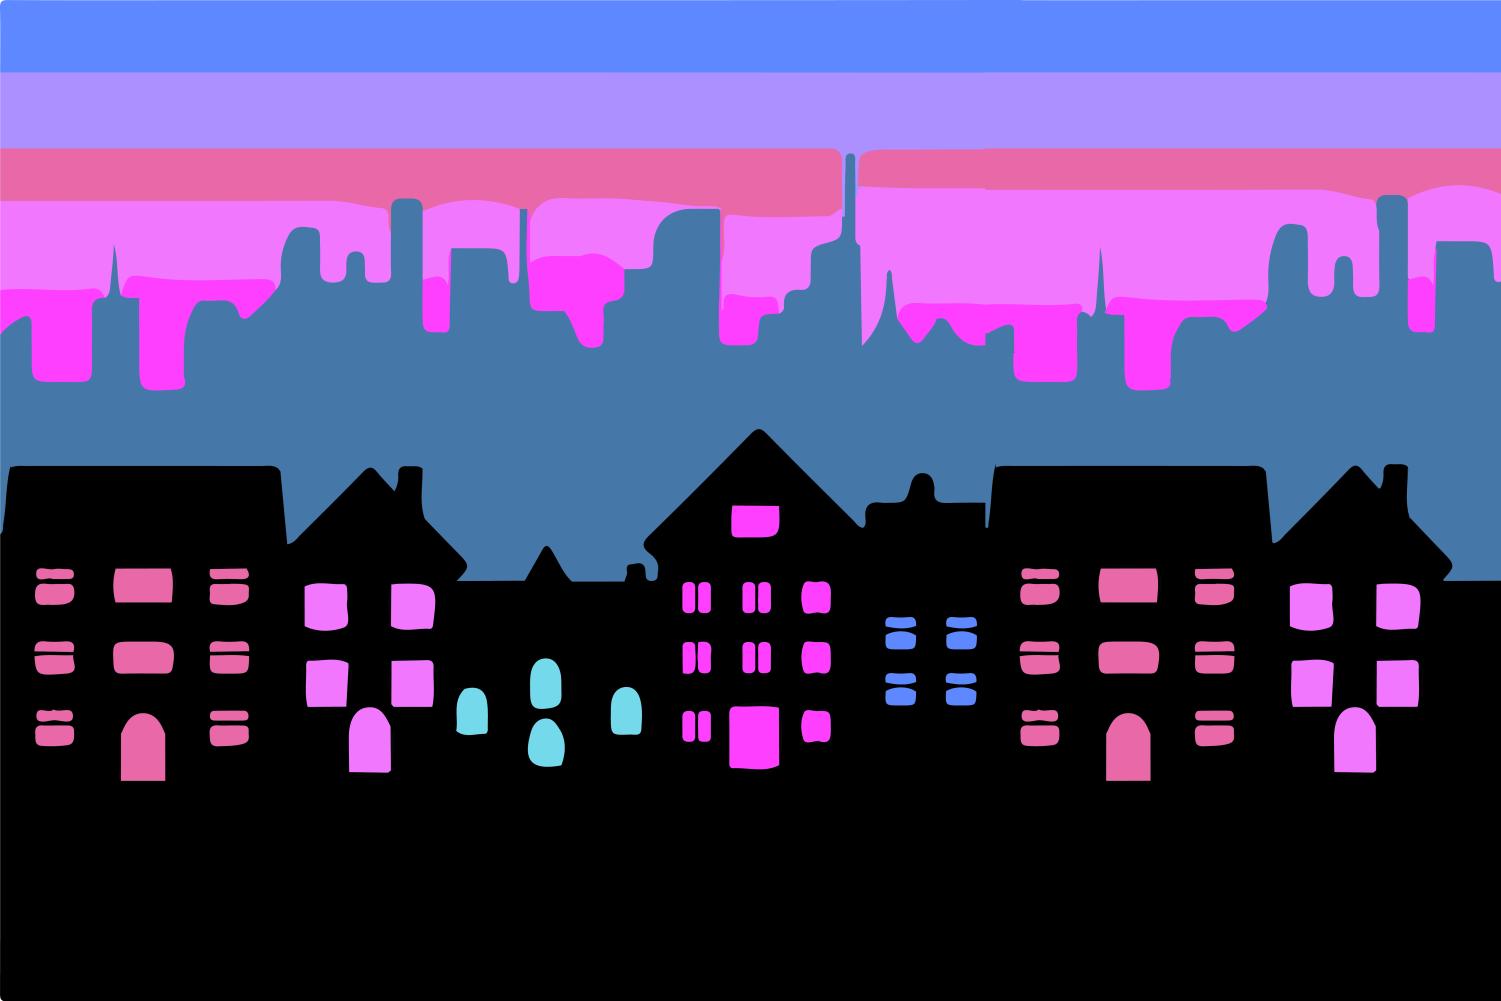 Illustration+of+houses+and+apartment+buildings+with+lit-up+windows+in+pinks+and+blues%2C+set+against+a+pink-and-blue+skyline+of+skyscrapers.